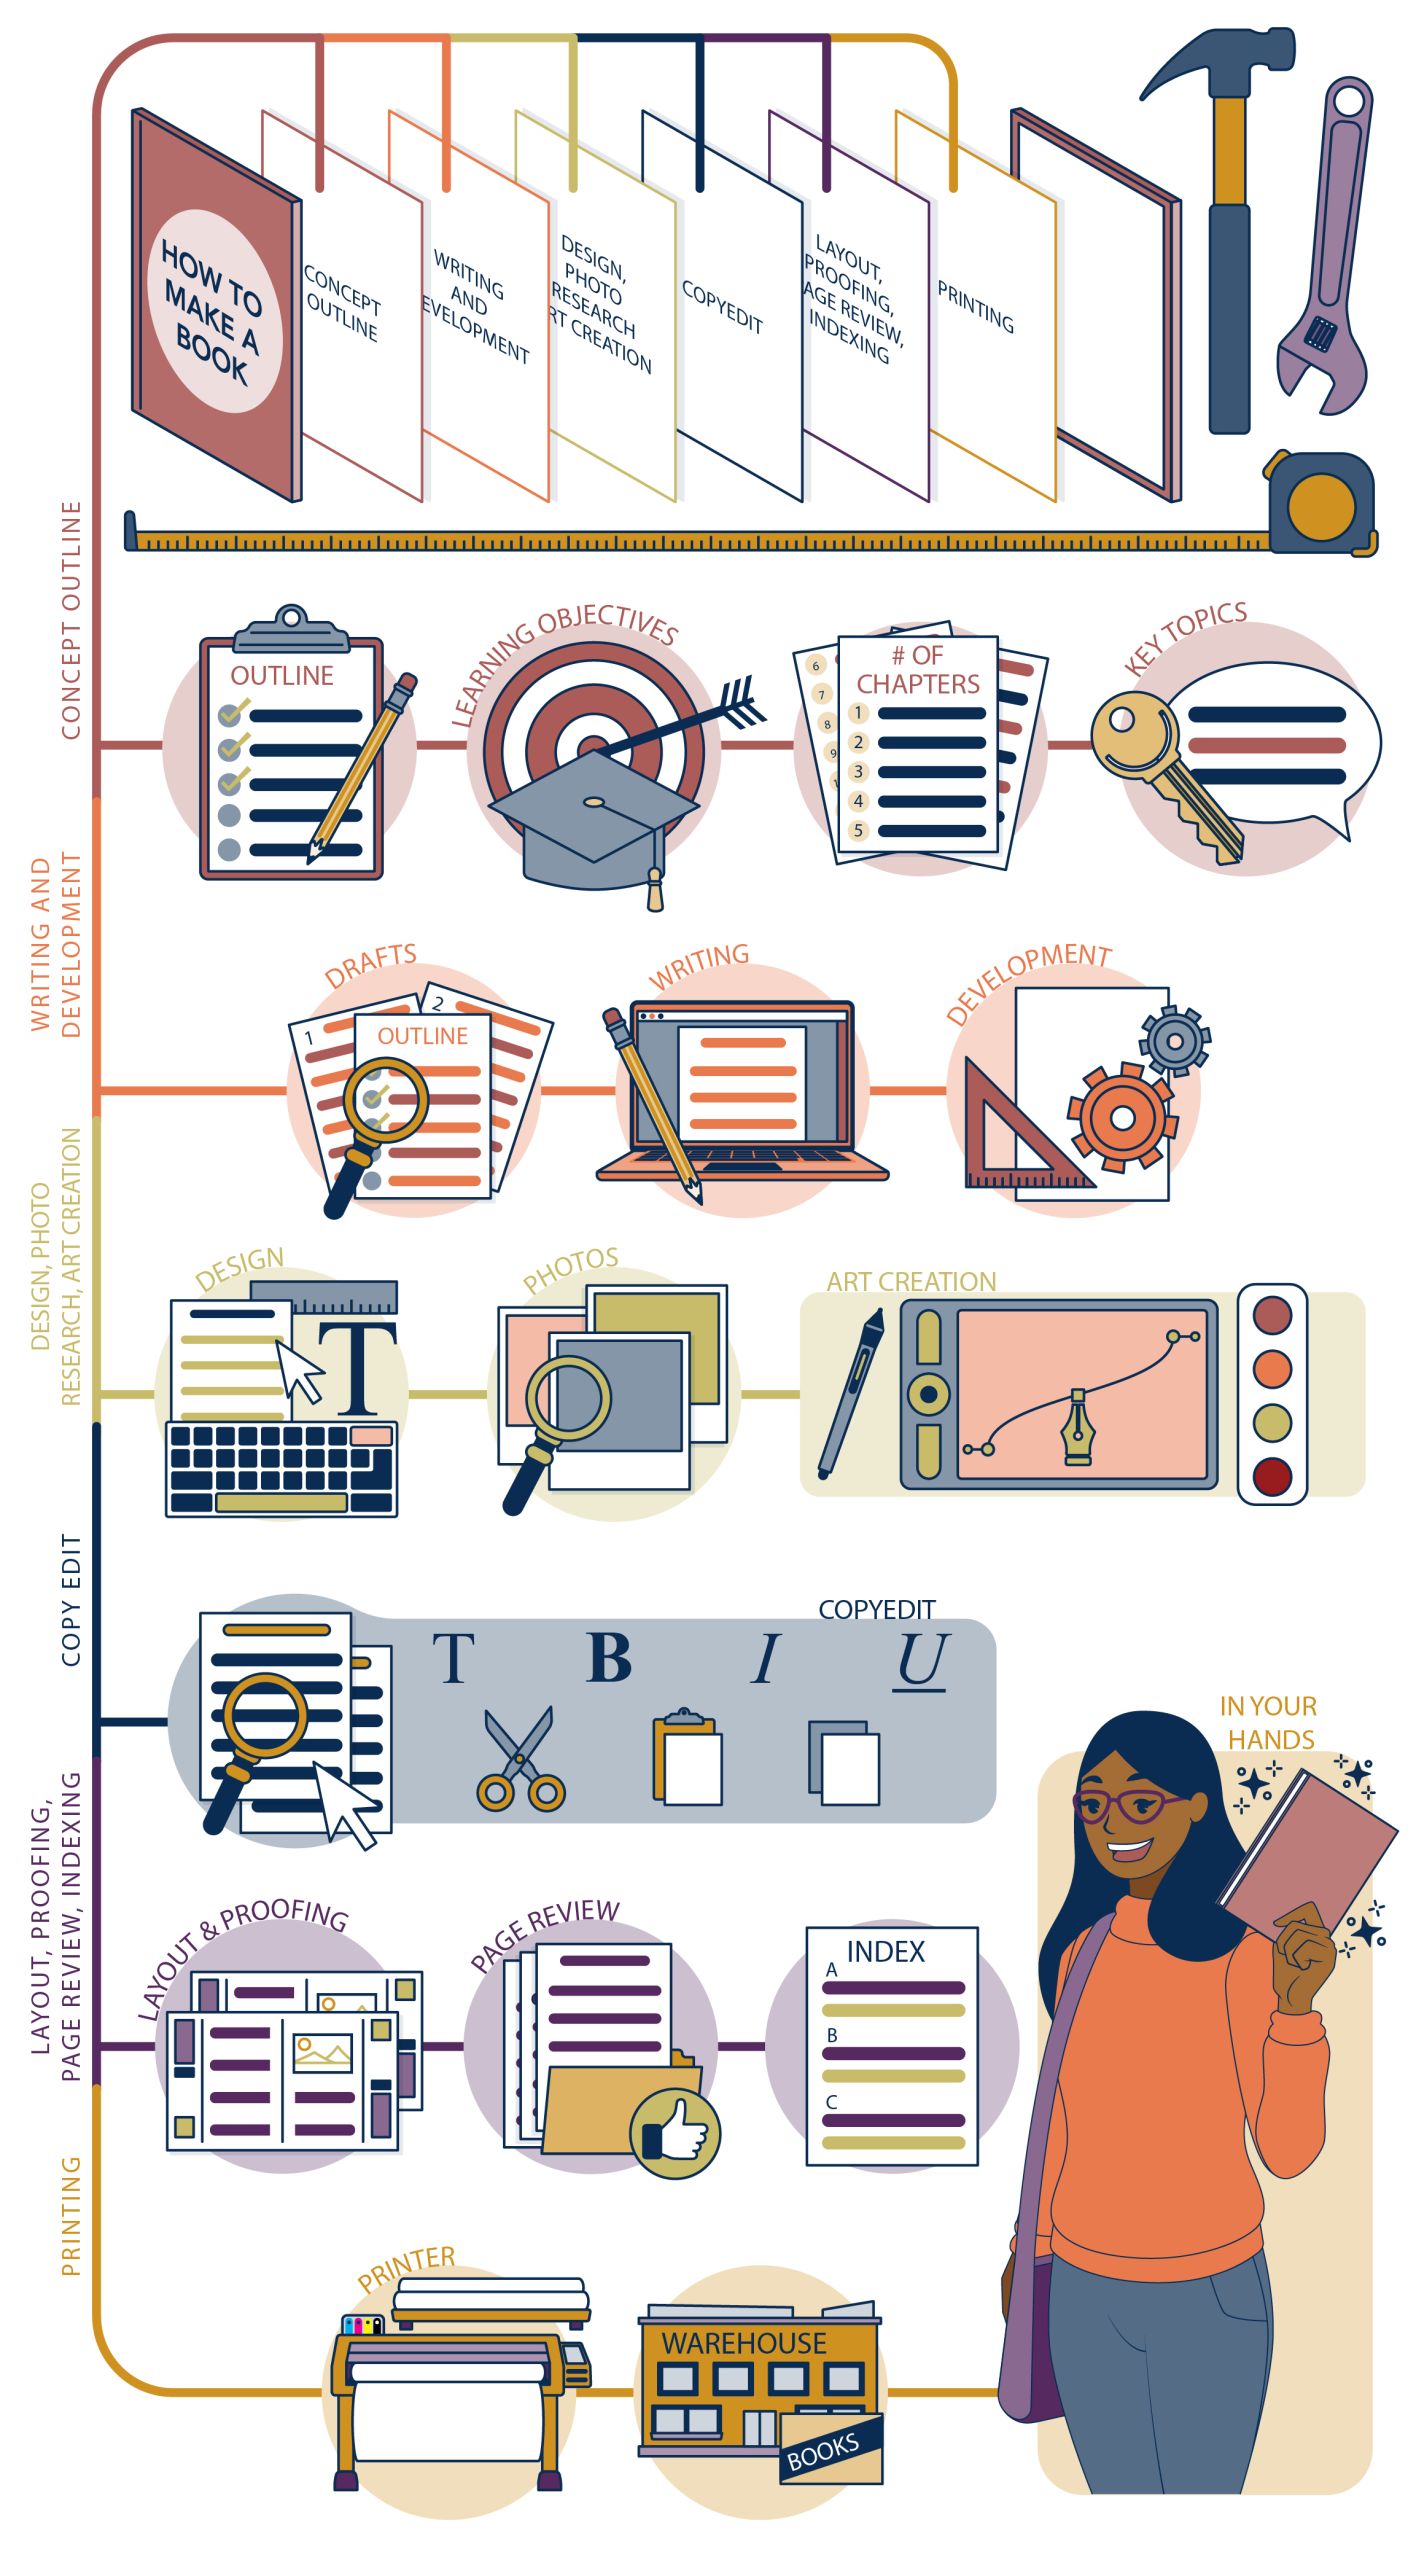 How a book is made infographic